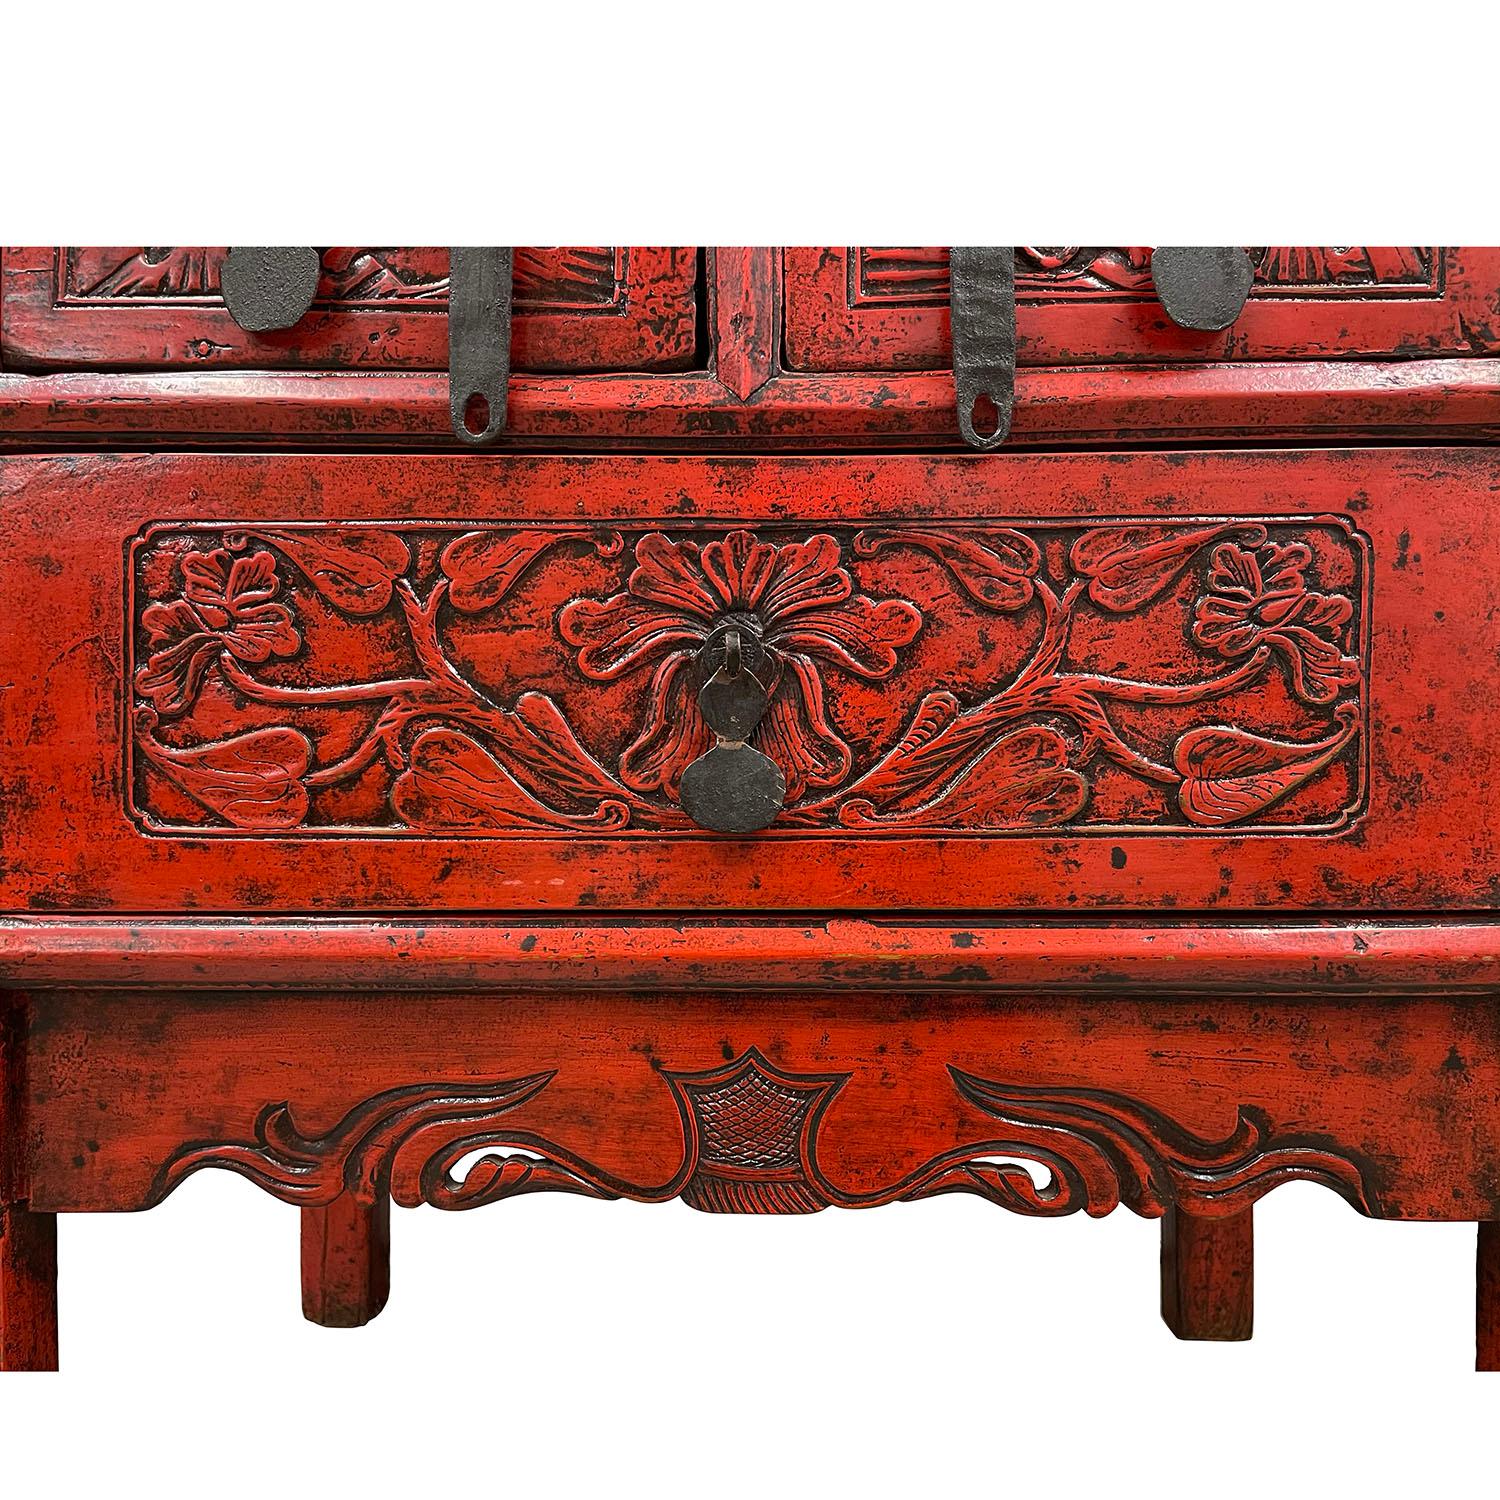 Elm 19th Century Antique Chinese Carved Red Lacquer Console Table / Sideboard For Sale